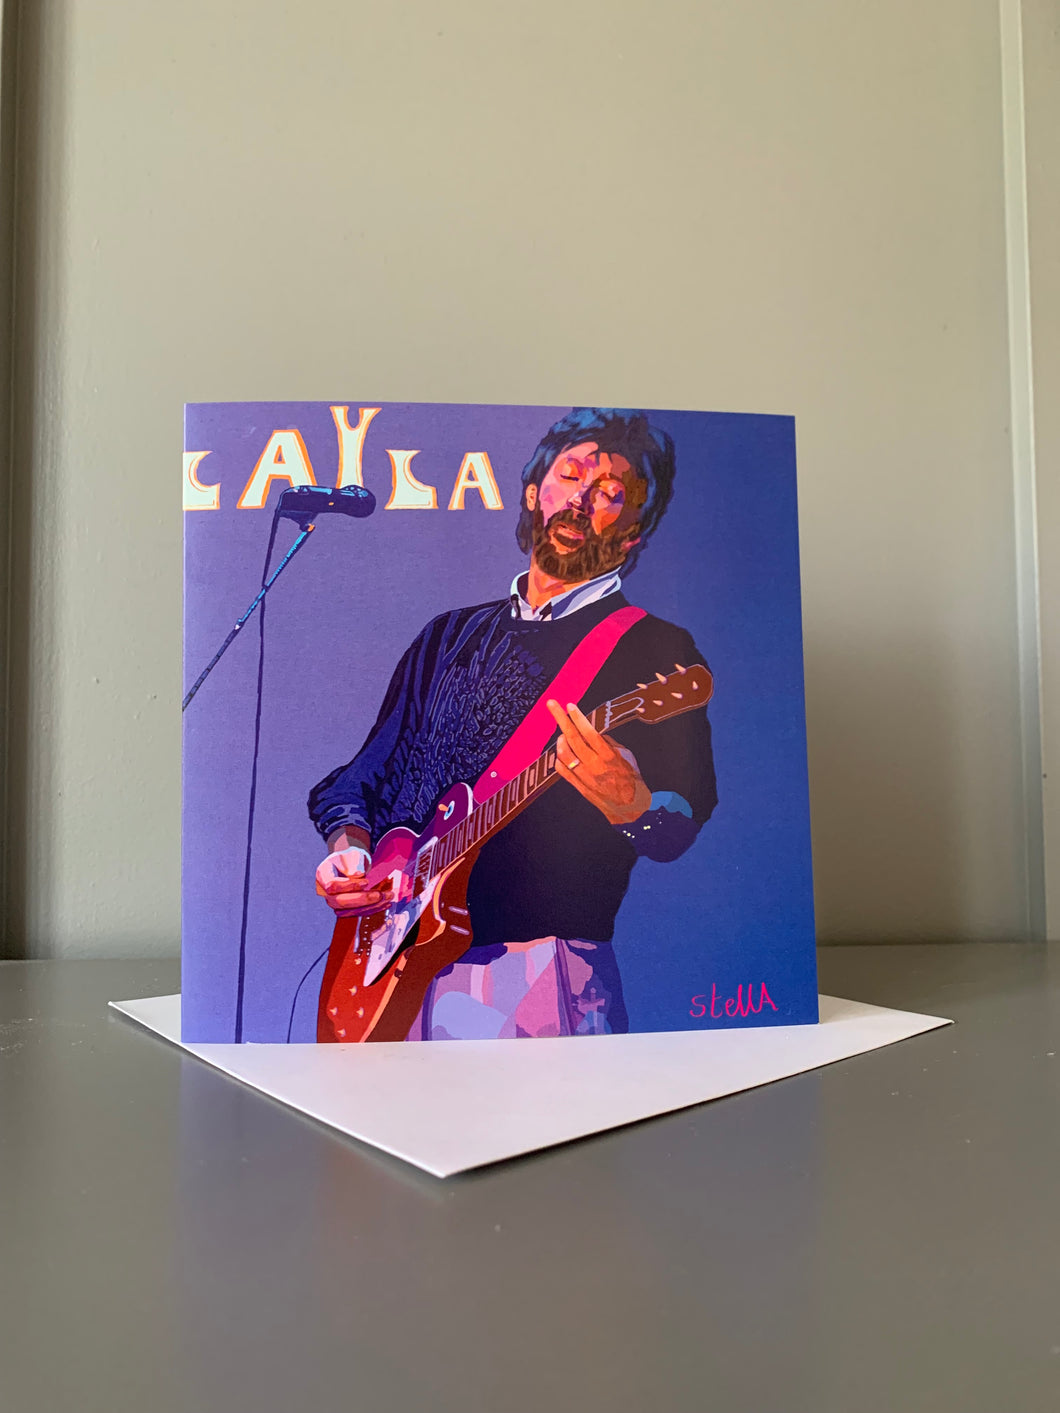 Eric Clapton fine art greetings card based on digital painting by Stella Tooth artist